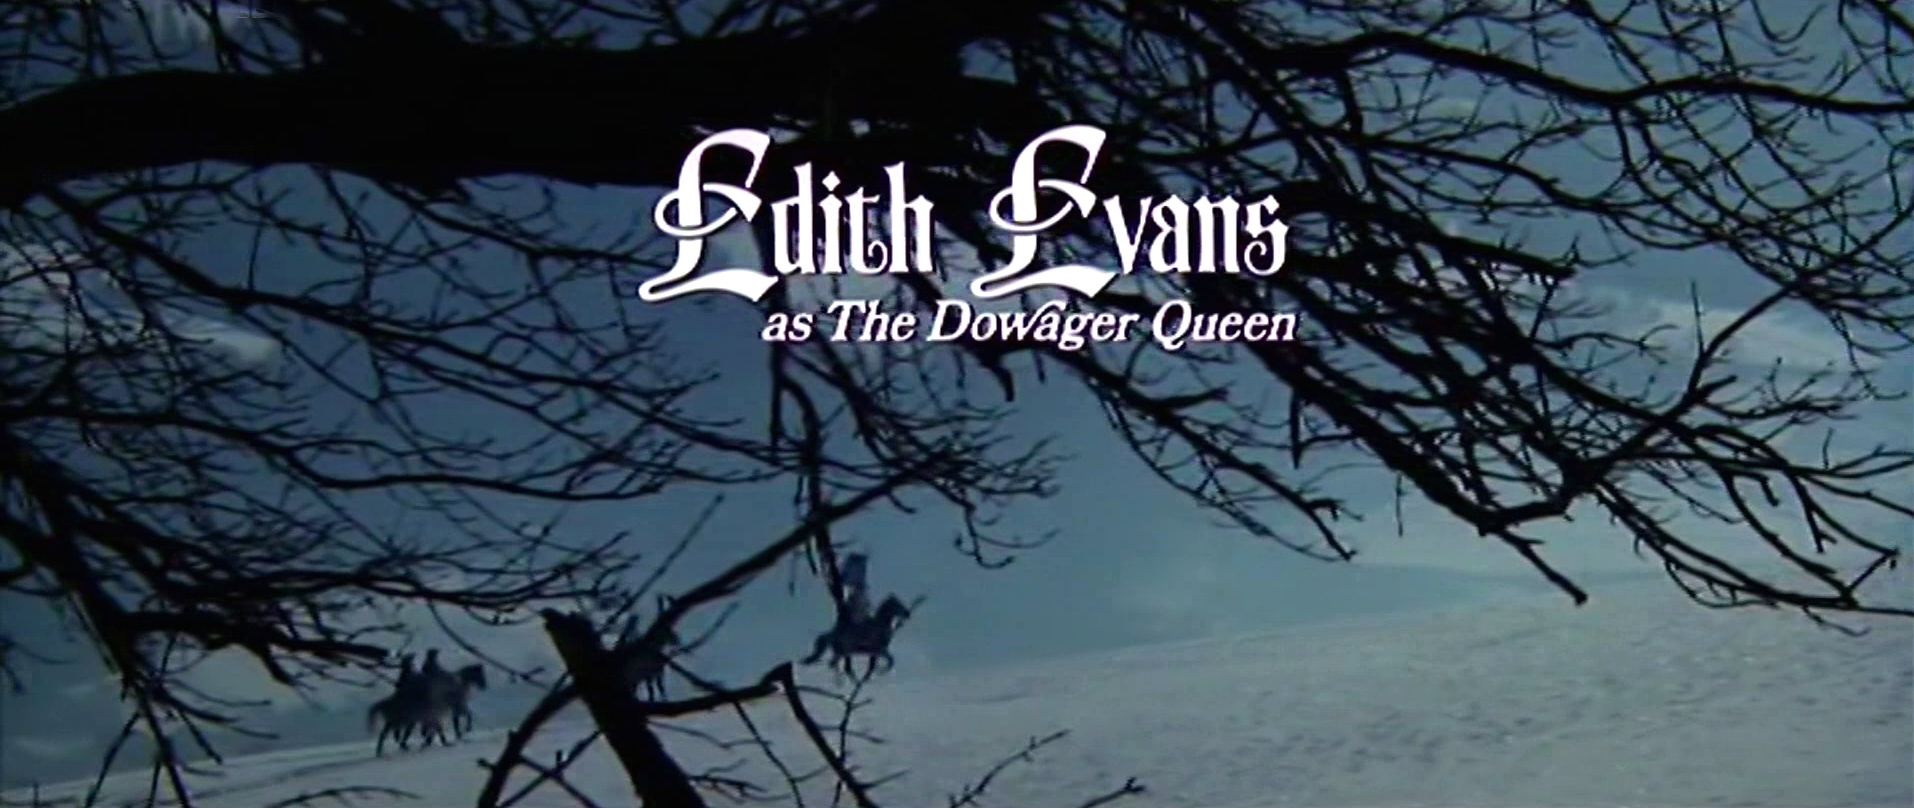 Main title from The Slipper and the Rose (1976) (7). Edith Evans as The Dowager Queen